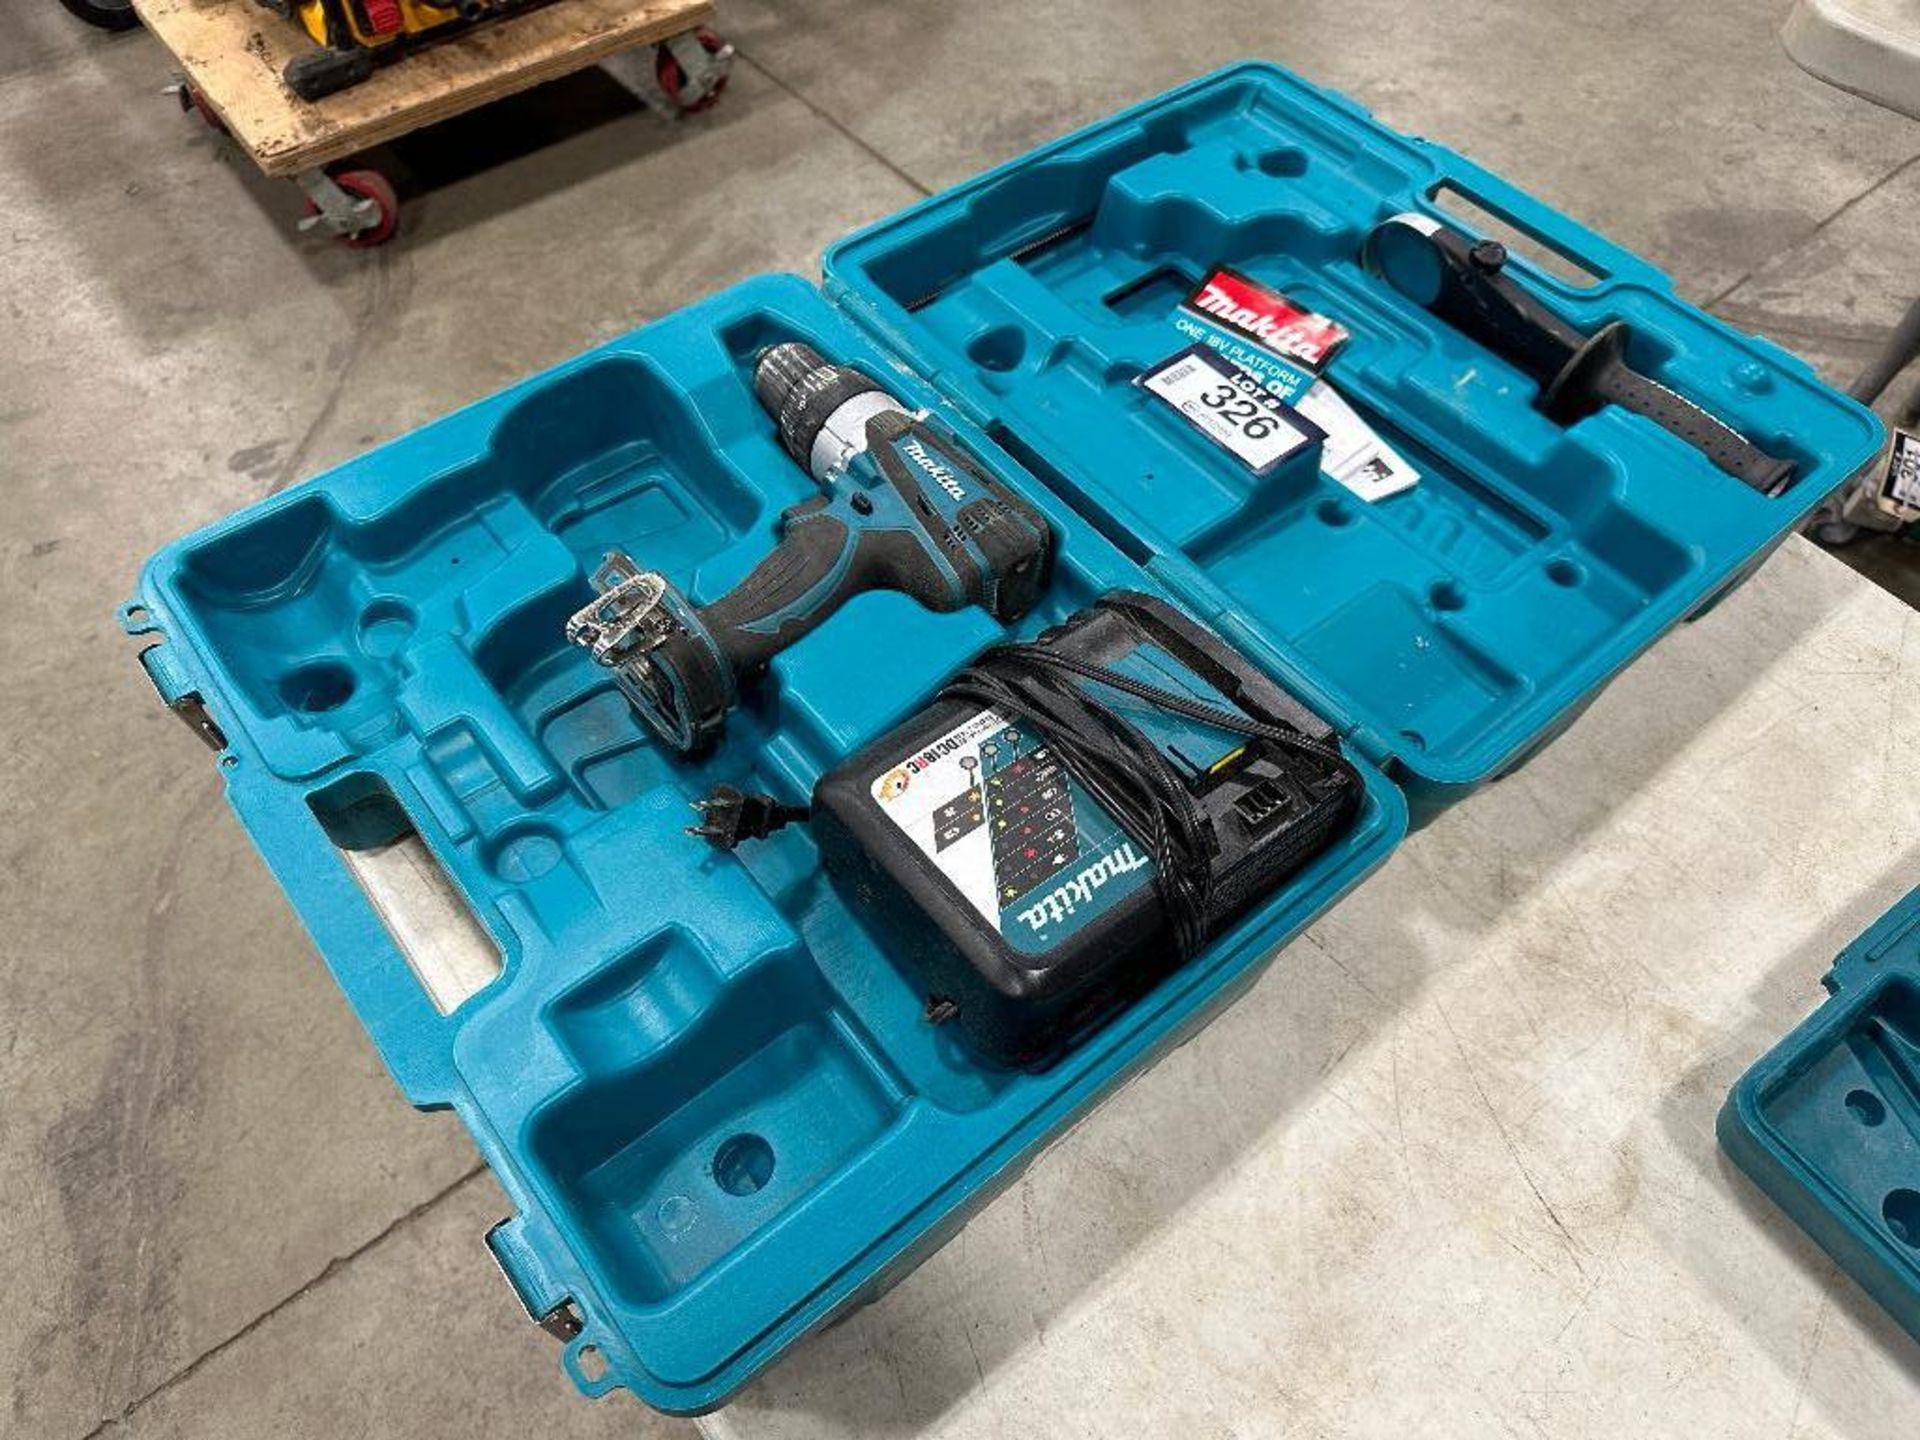 Makita DHP458 Cordless Drill w/ Battery Charger and Case - Image 2 of 5